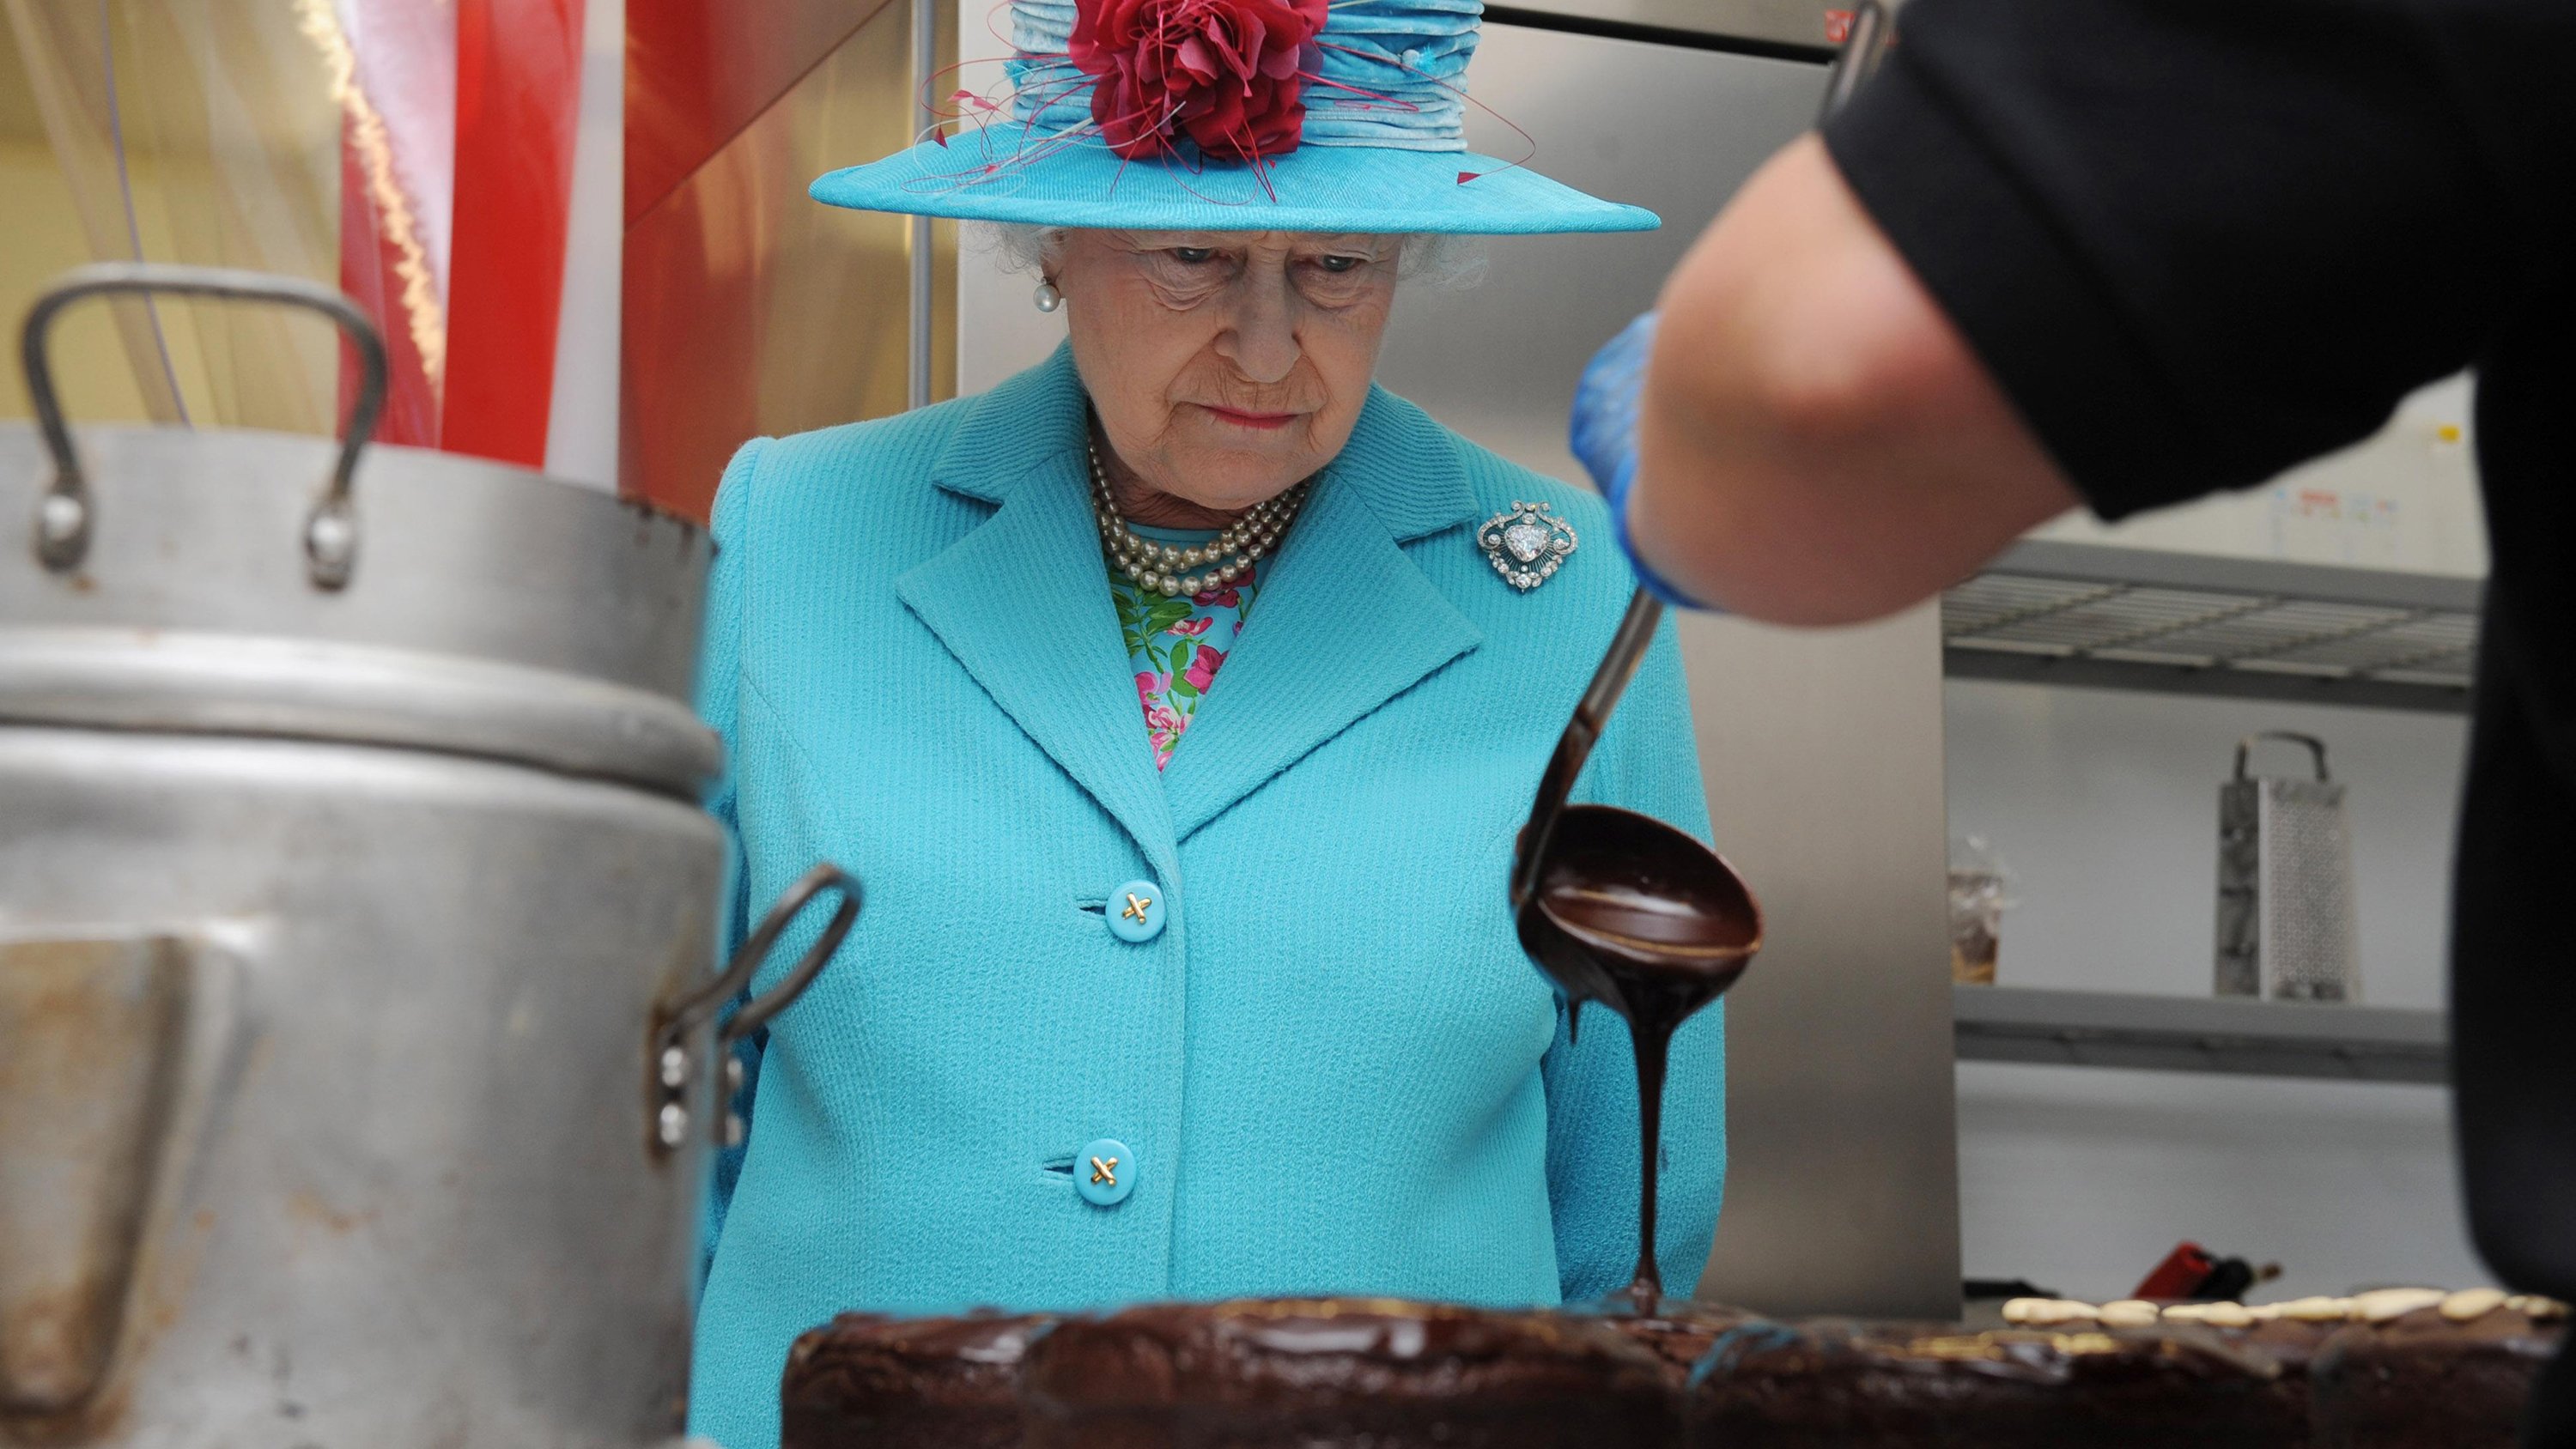 https://www.gettyimages.co.uk/detail/news-photo/queen-elizabeth-ii-watches-as-a-cook-from-the-pie-mill-news-photo/81469637